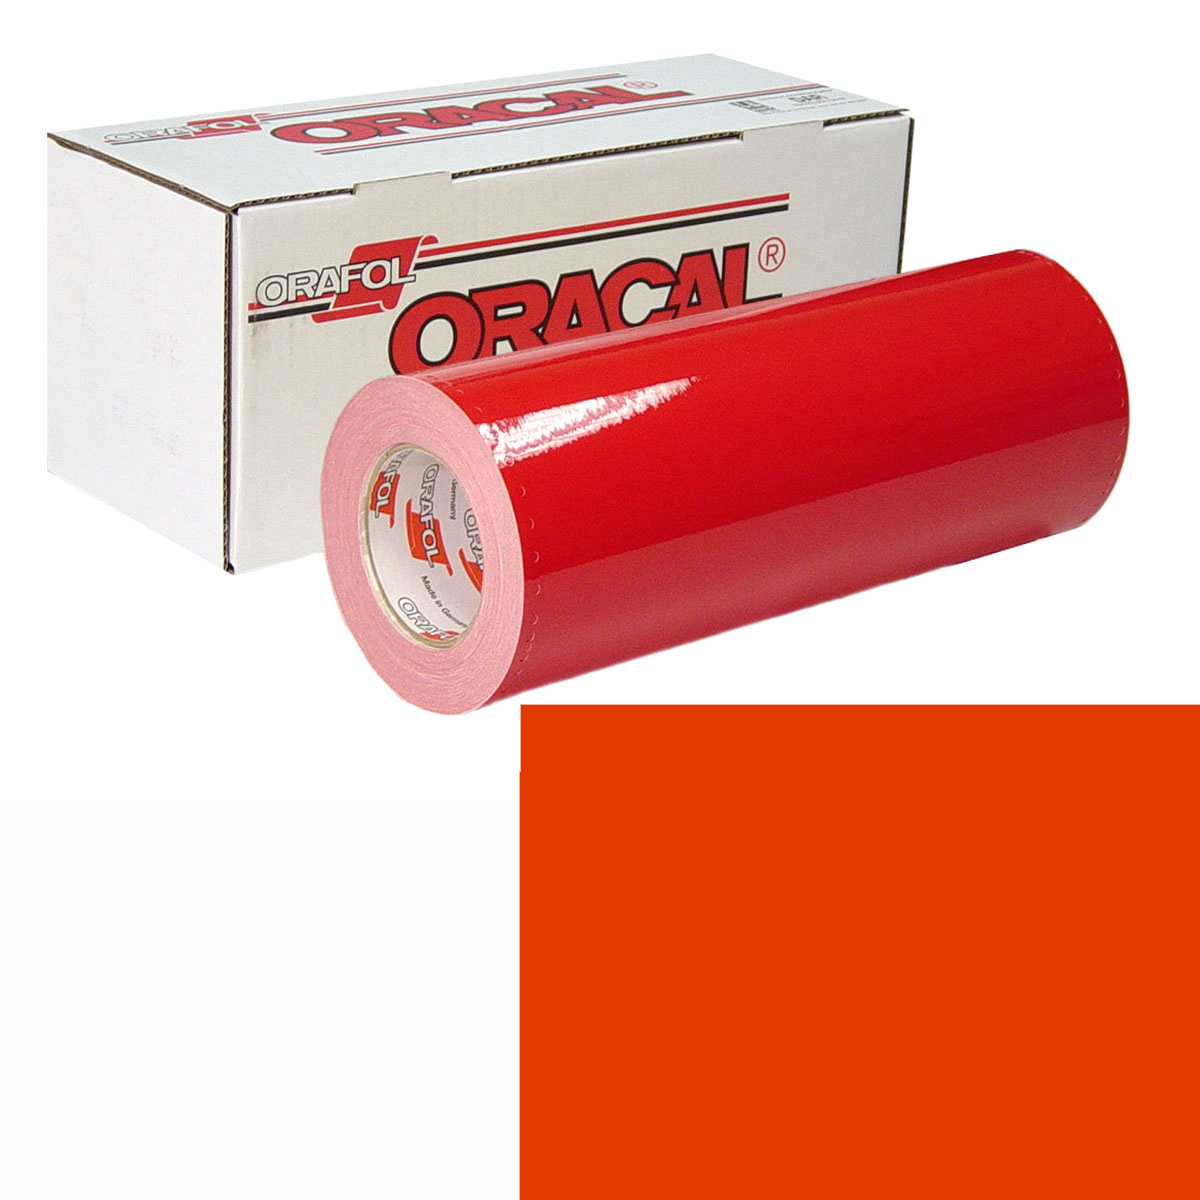 ORACAL 951 15in X 50yd 335 Mars Red